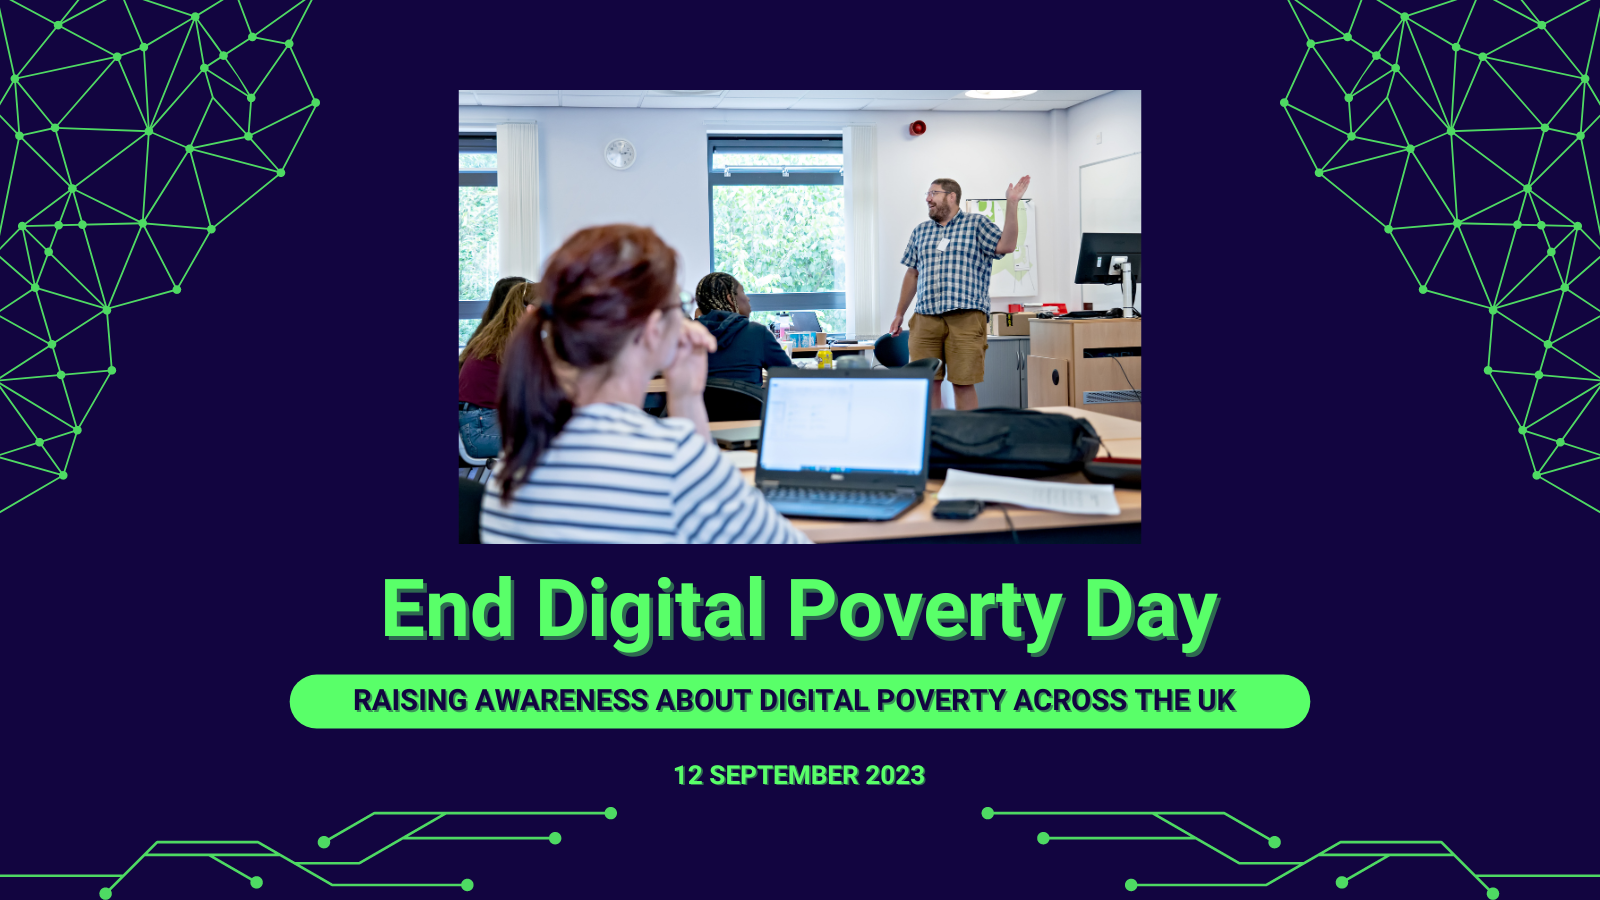 End Digital Poverty Day: Raising Awareness About Digital Poverty Across the UK